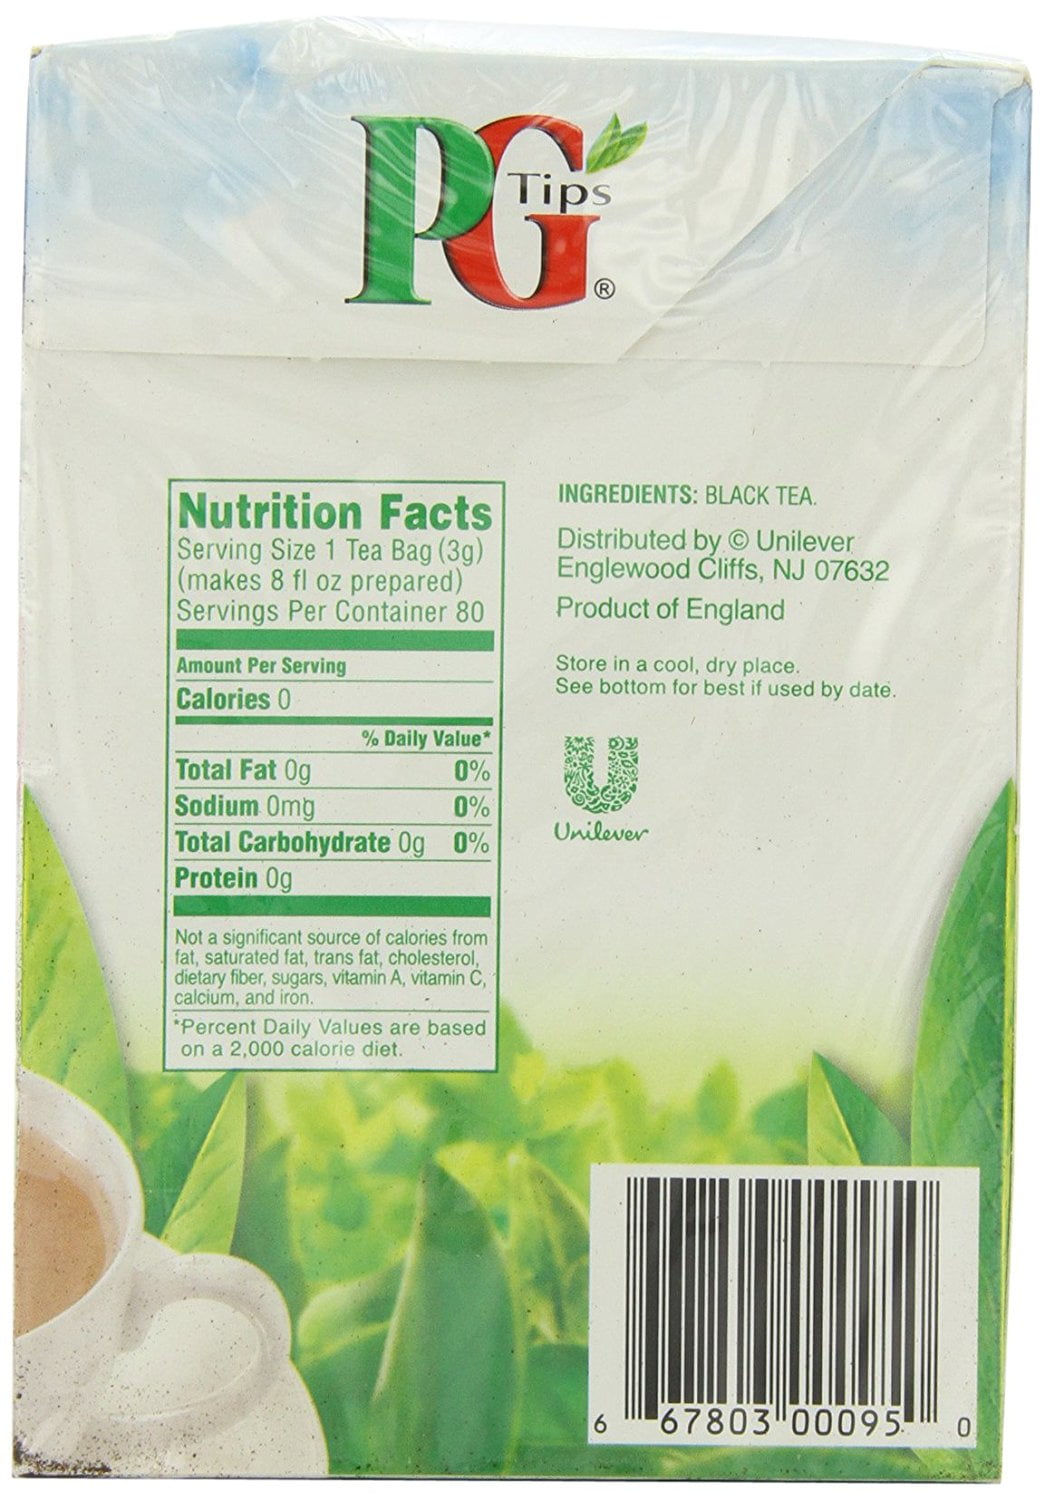 300 quality tea bags from PG Tips - Classic Black Tea! - Shop for